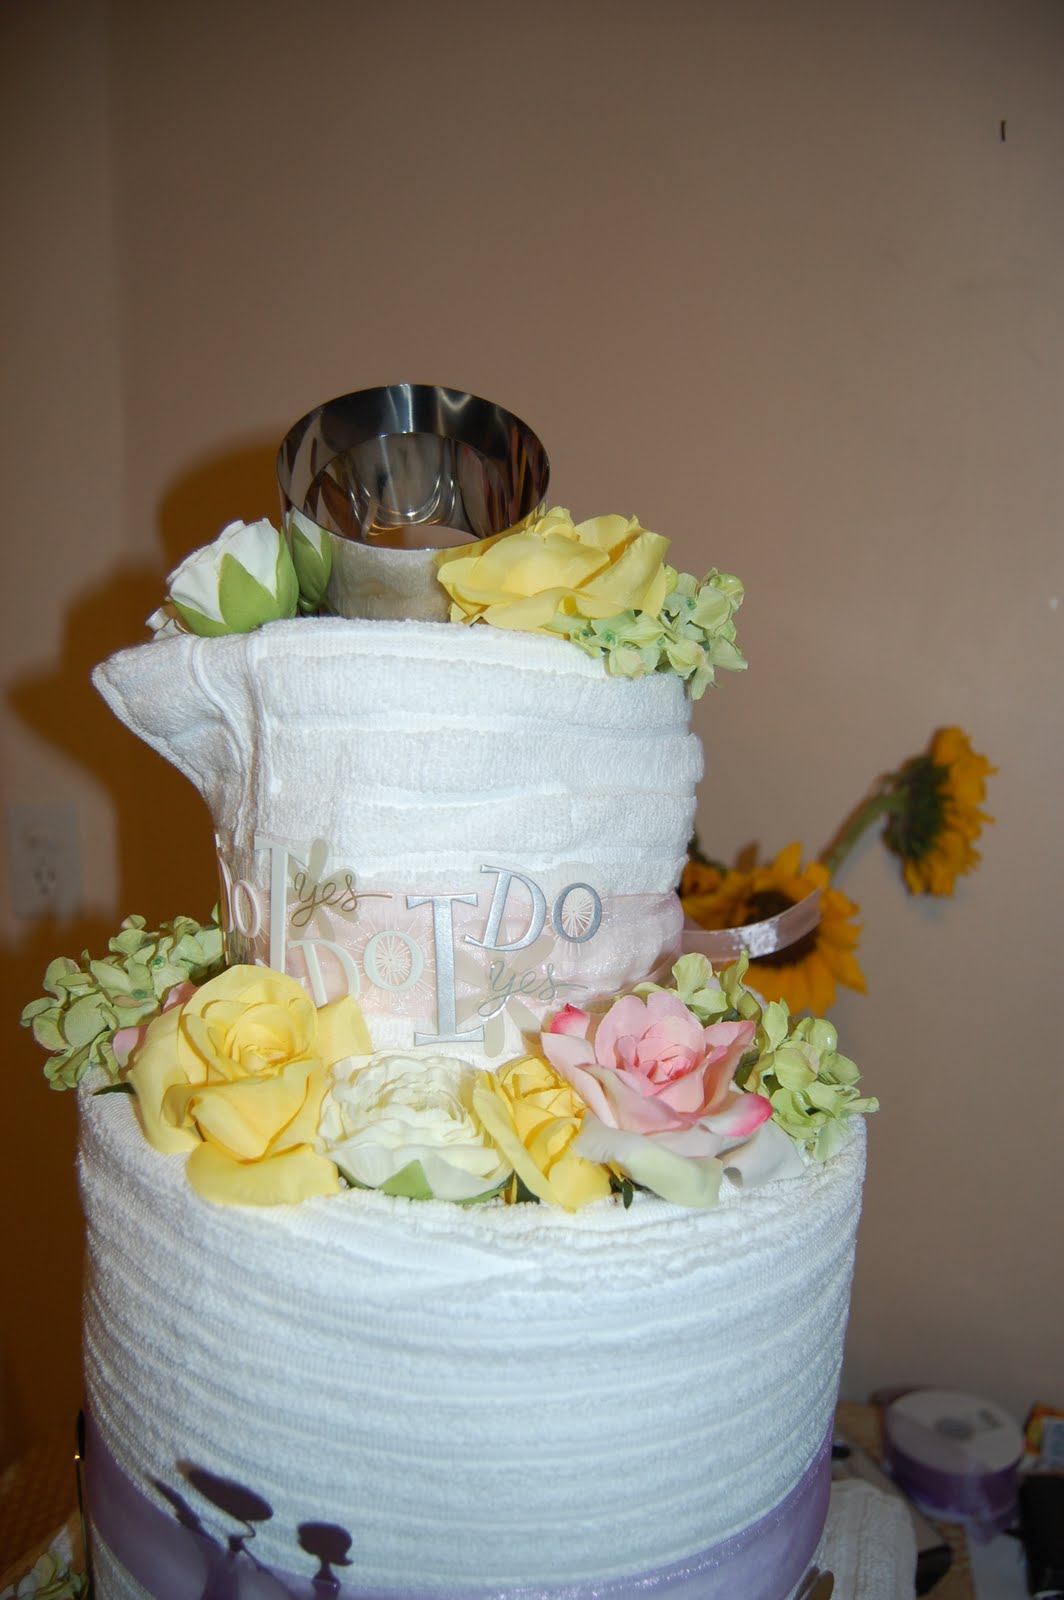 spring wedding cake ideas Posted by Ms. Christine at 10:40 AM